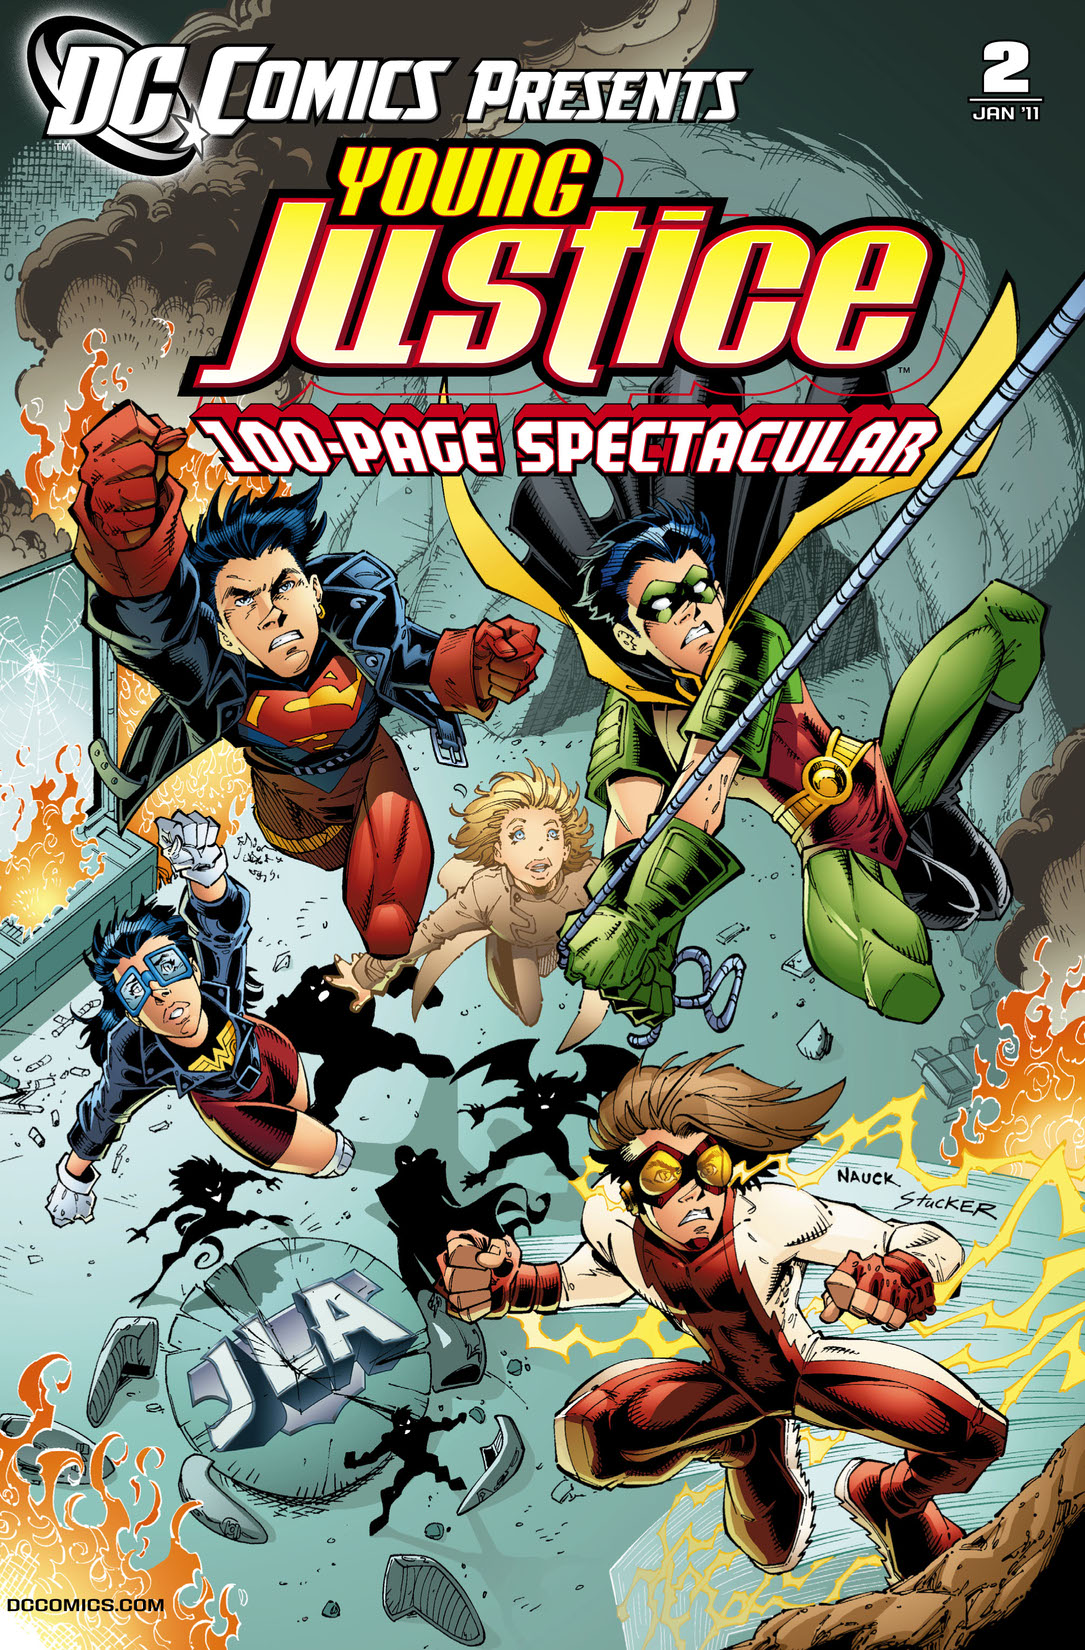 DC Comics Presents: Young Justice (2010-) #2 preview images